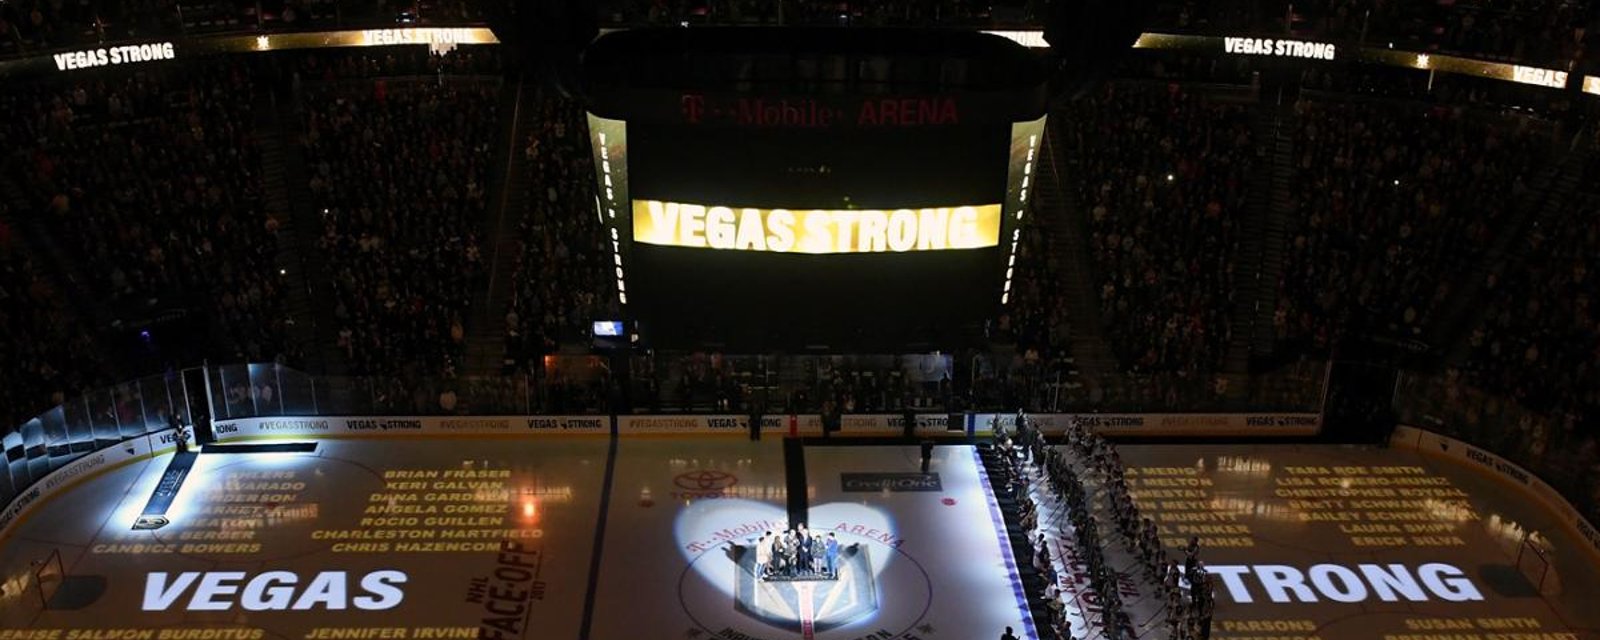 Must see: Golden Knights offer incredibly touching tribute in wake of massacre